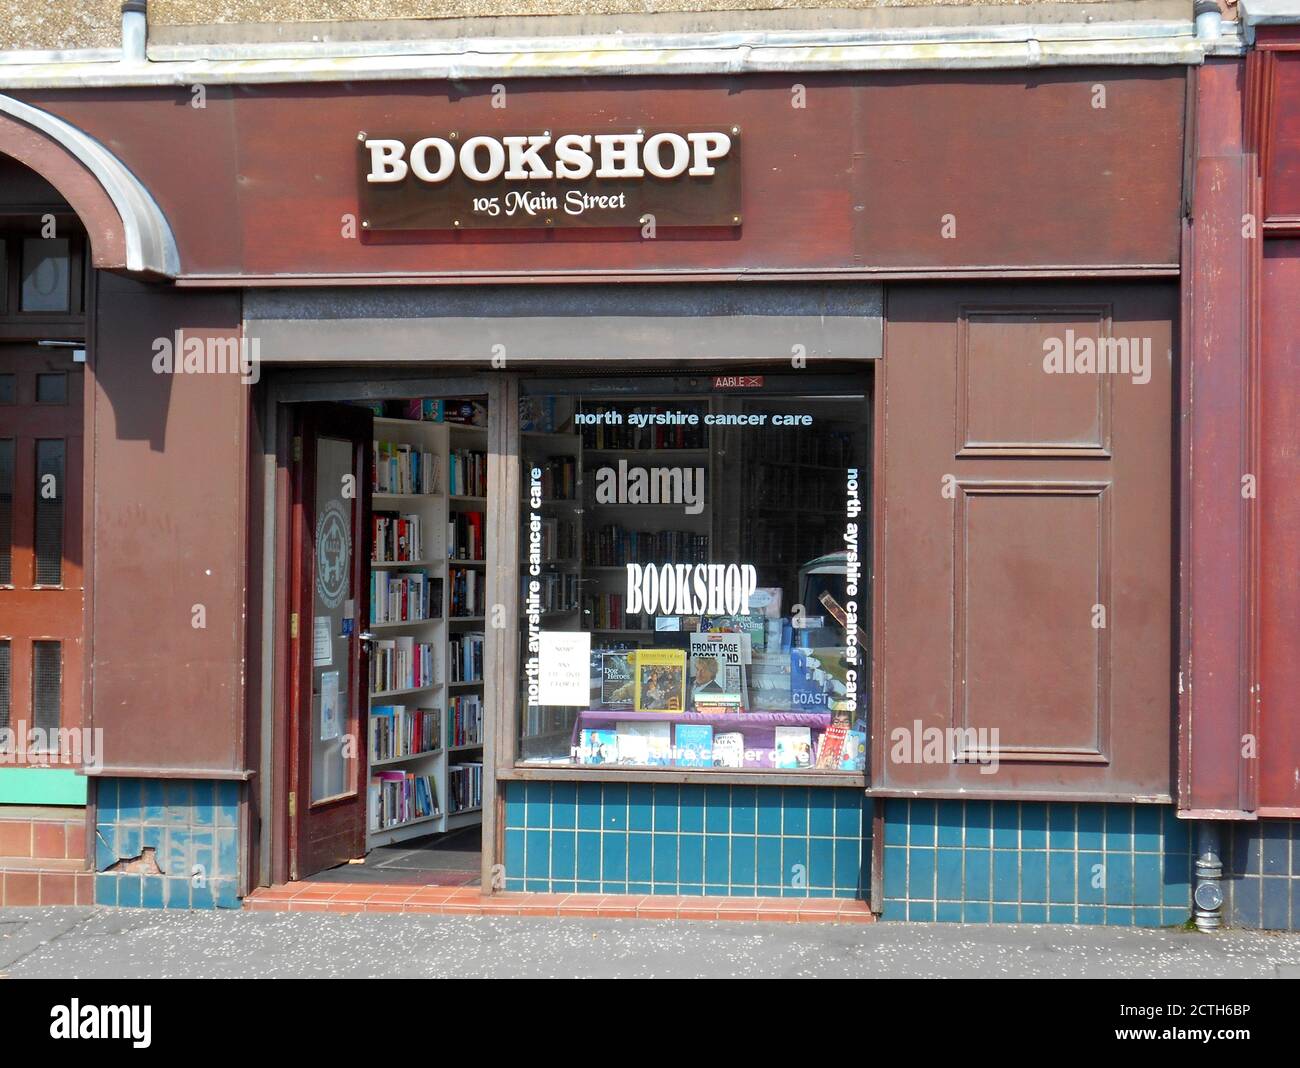 A wonderful second hand book shop in the seaside town of Largs. All the proceeds go to a local cancer charity. The shop is full of all kinds of books and worth a visit if you are ever down that way. West coast of Scotland. ALAN WYLIE/ALAMY© Stock Photo